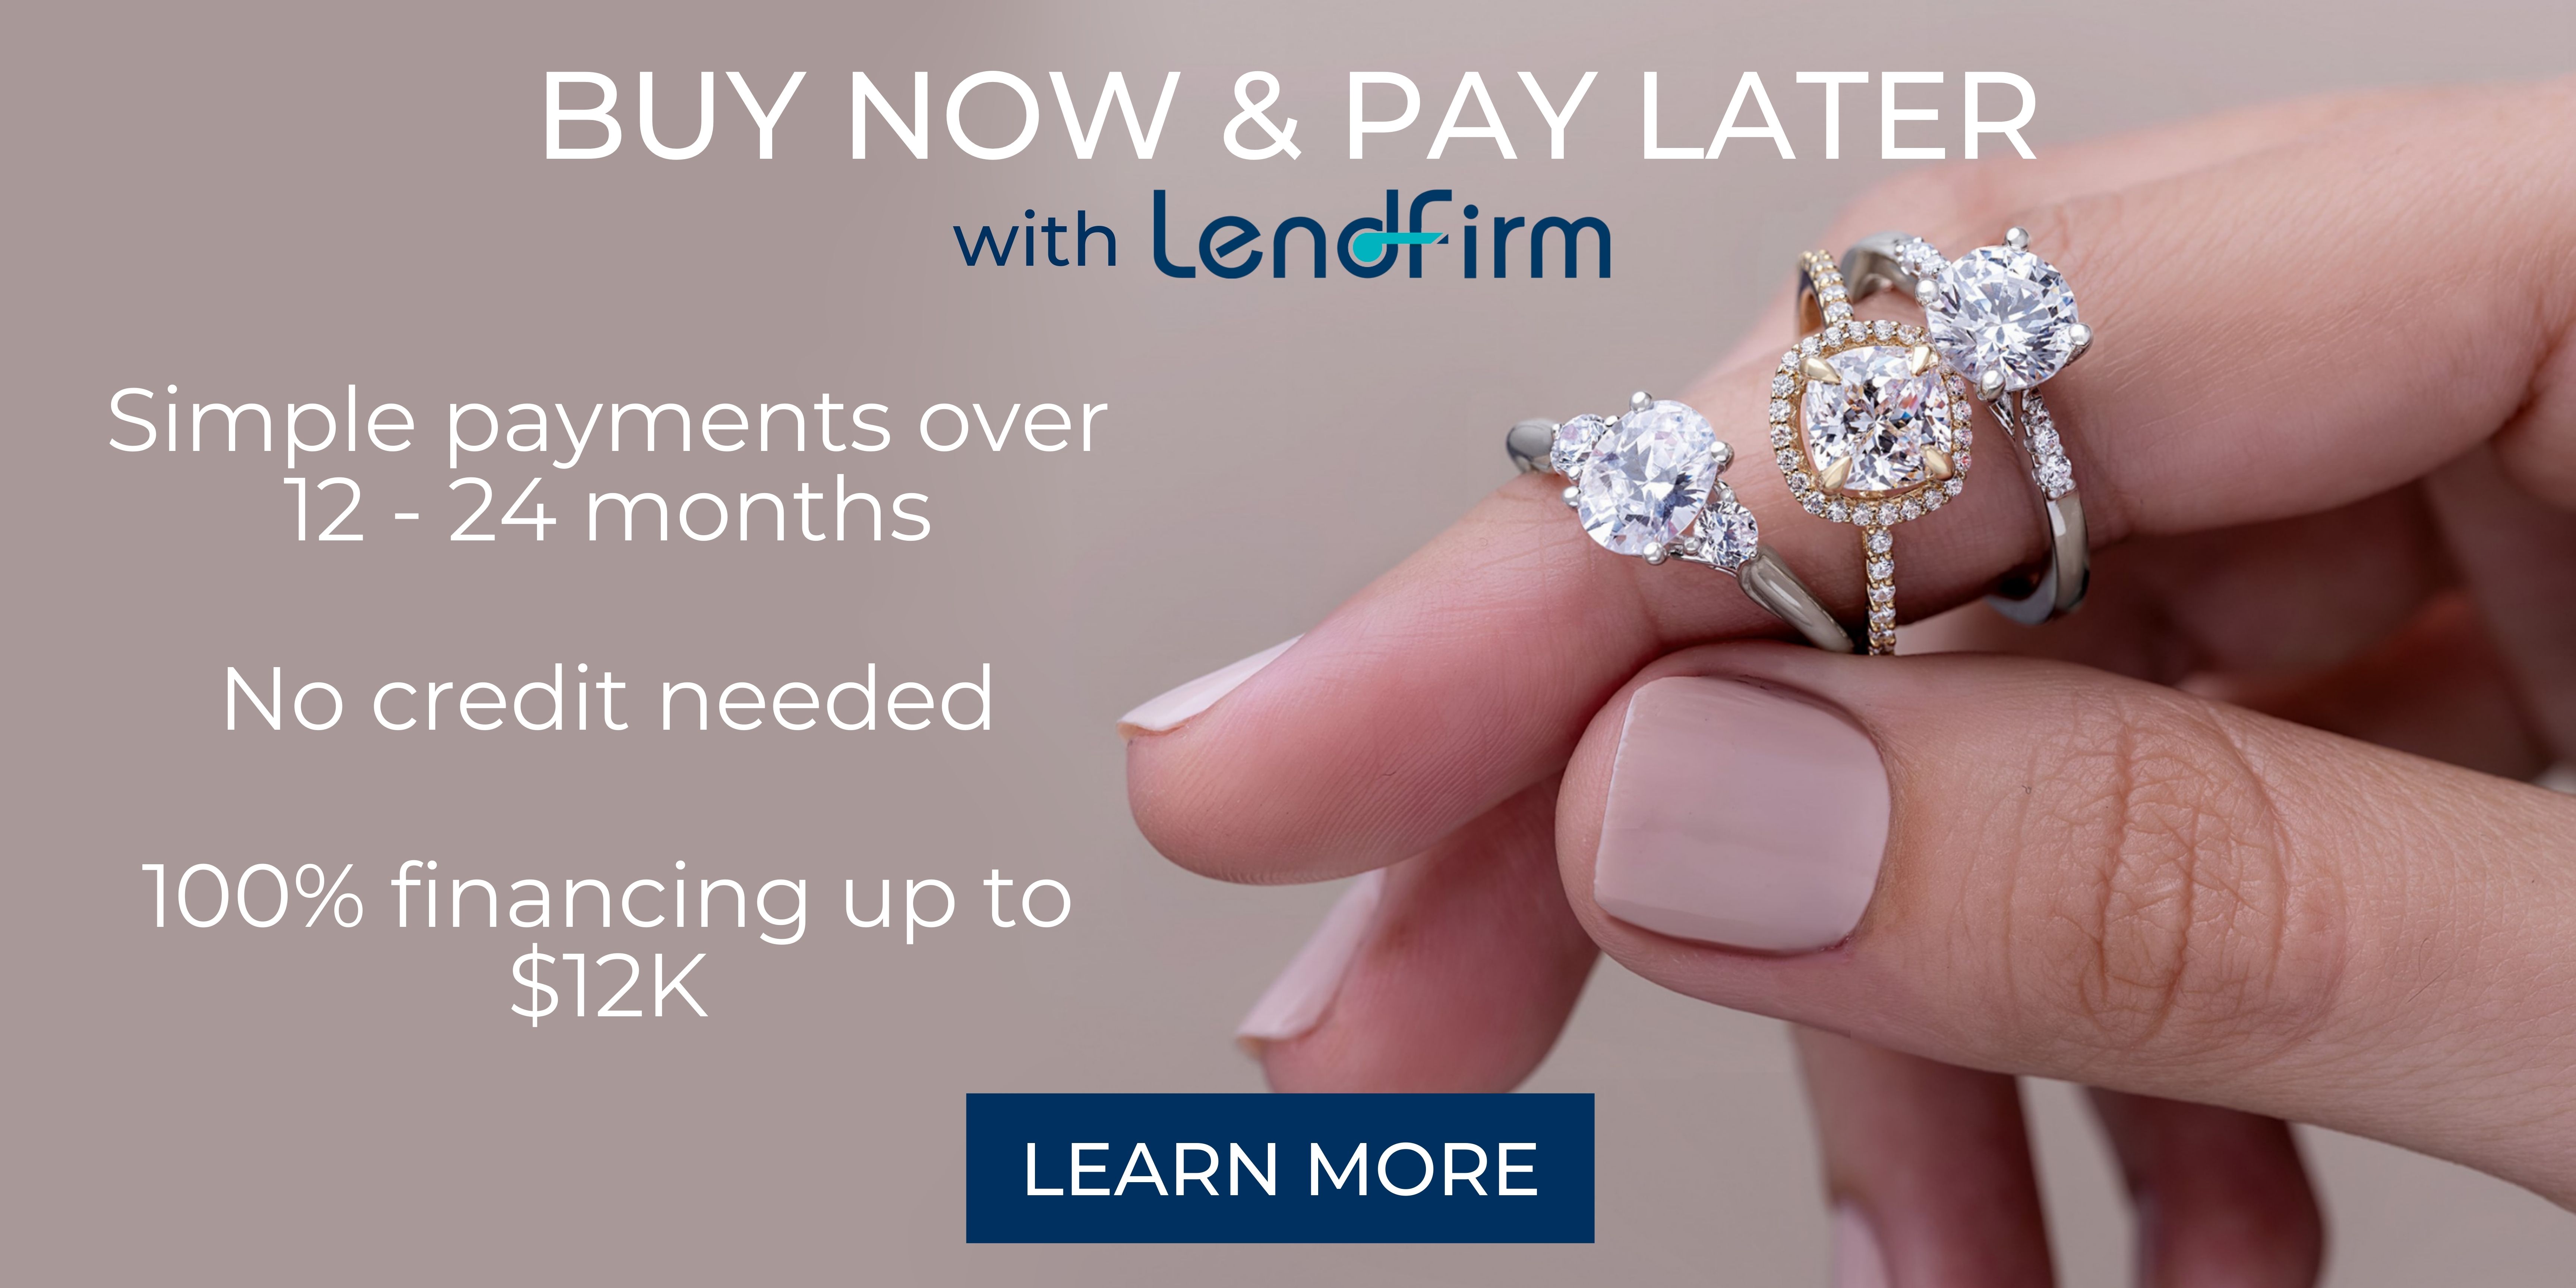 Buy Now & Pay Later with LendFirm Financing